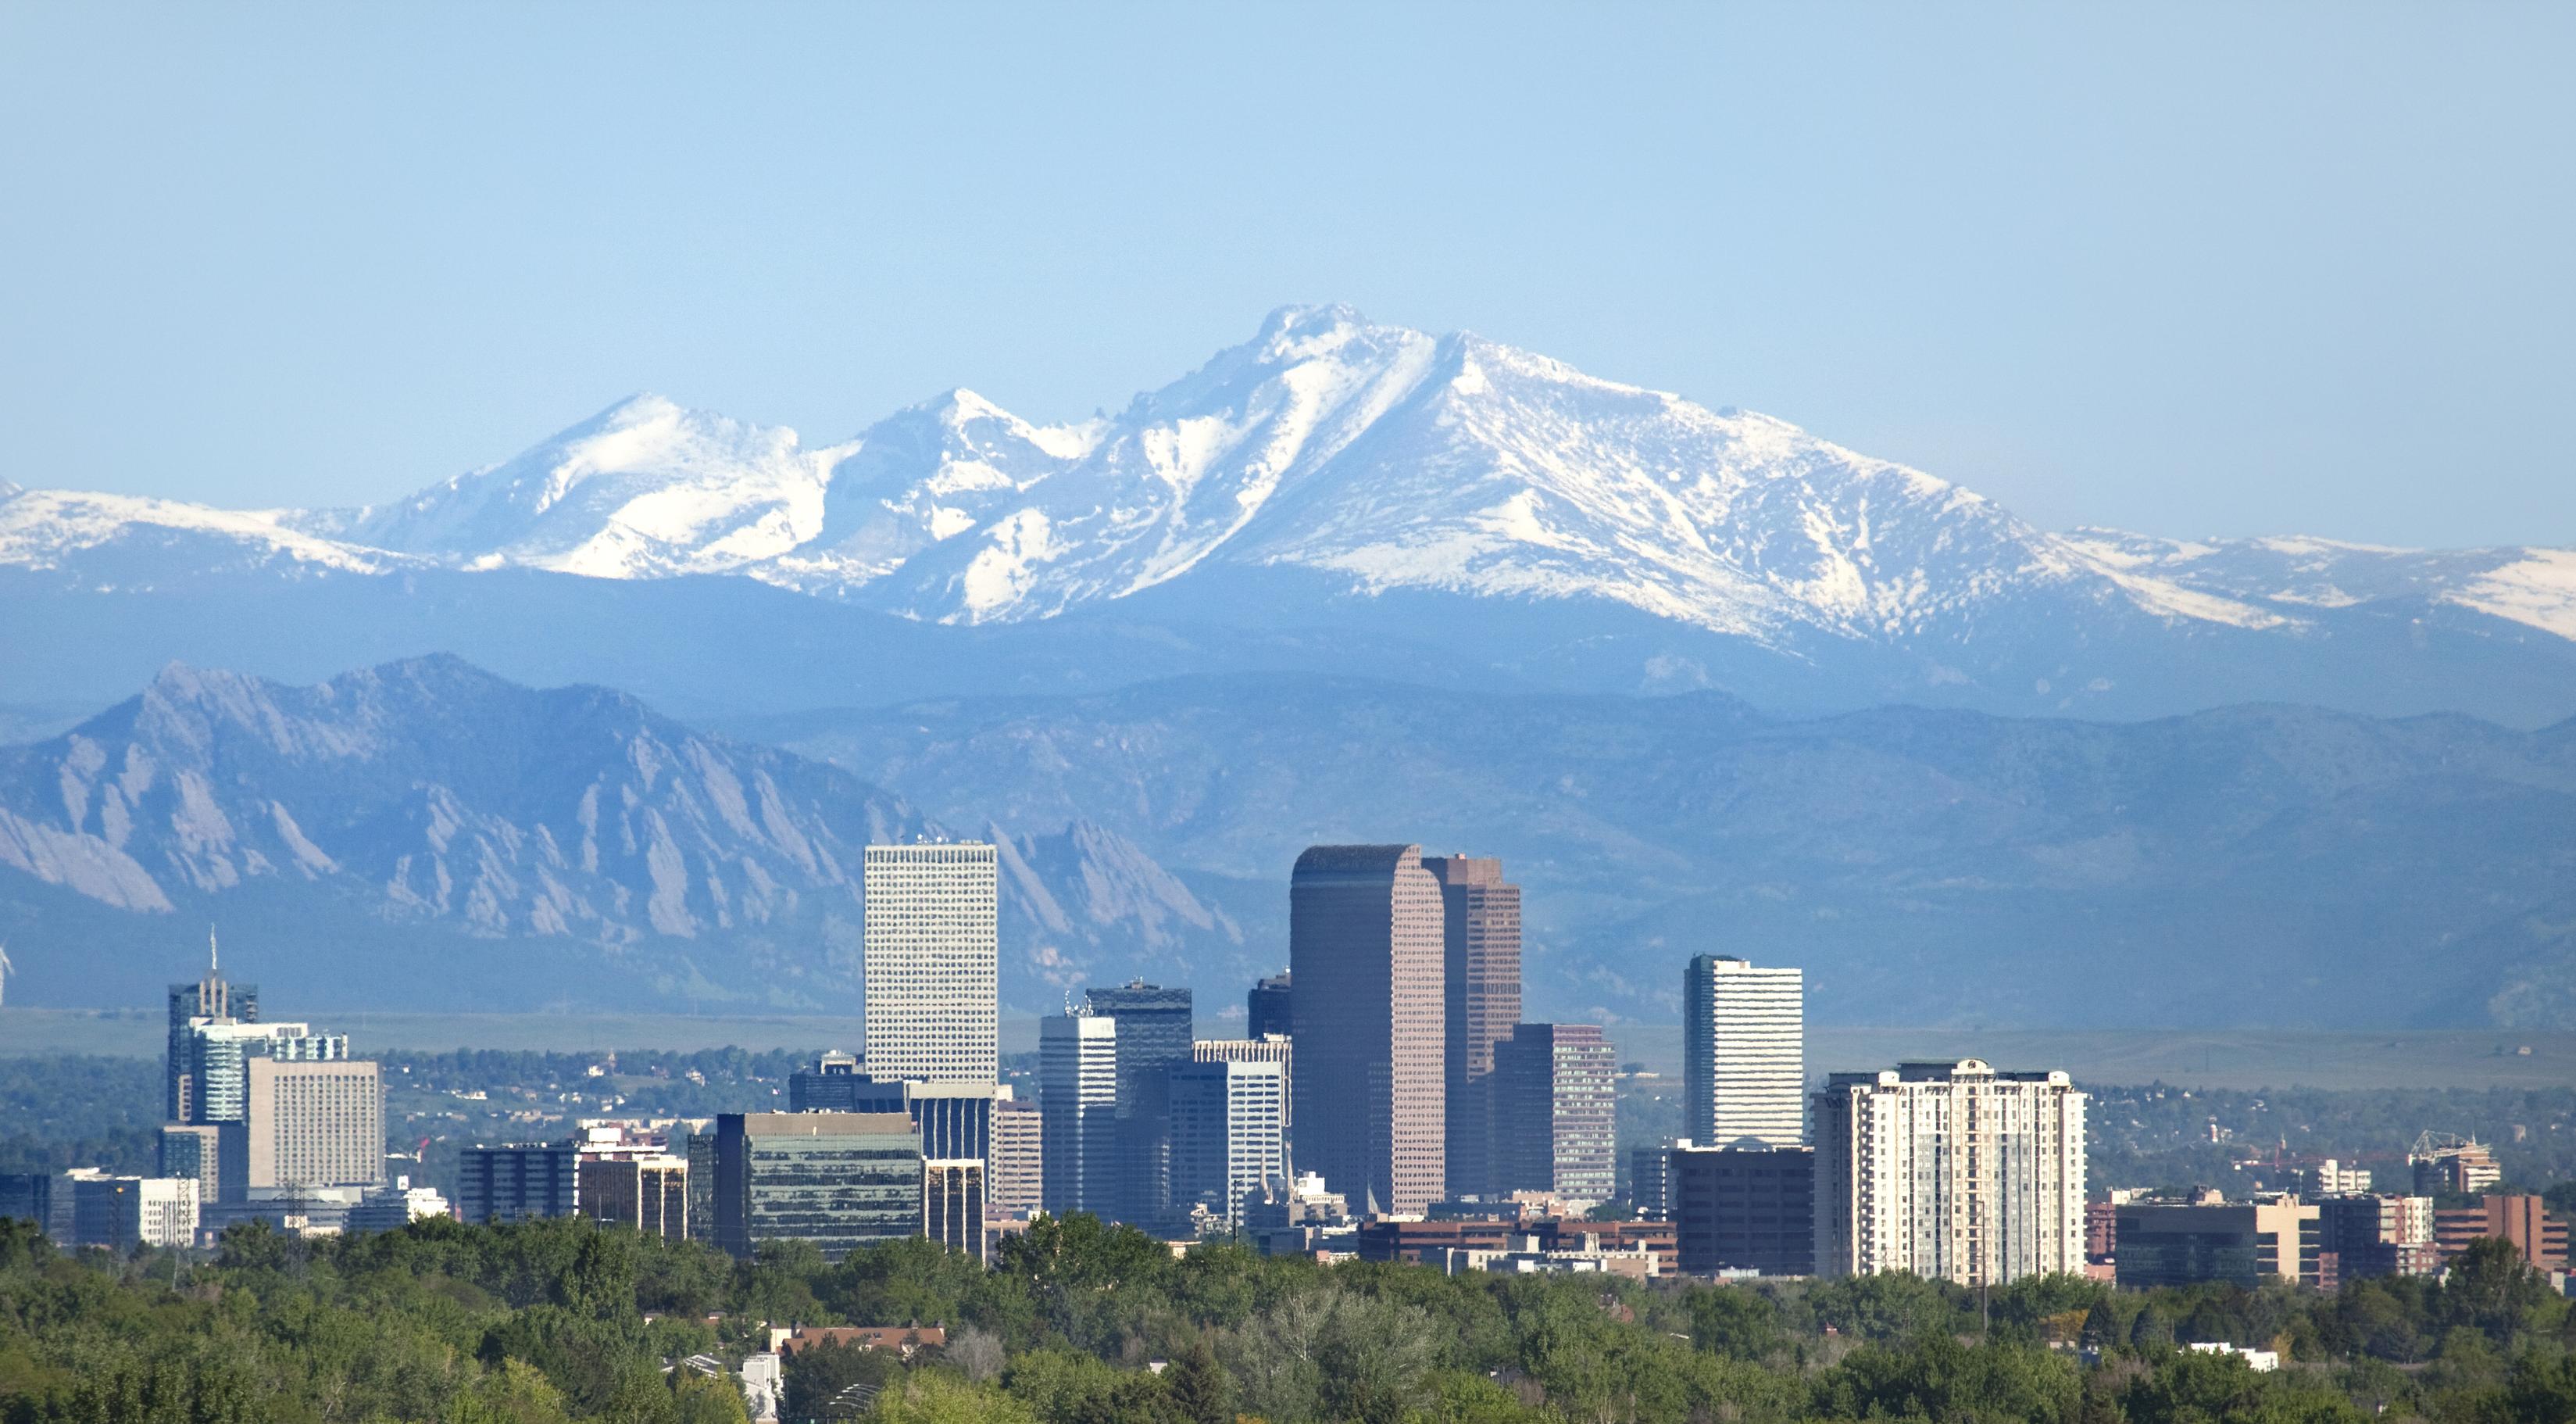 Denver, Colorado where BMO Harris Bank's new Commercial Banking office has opened.